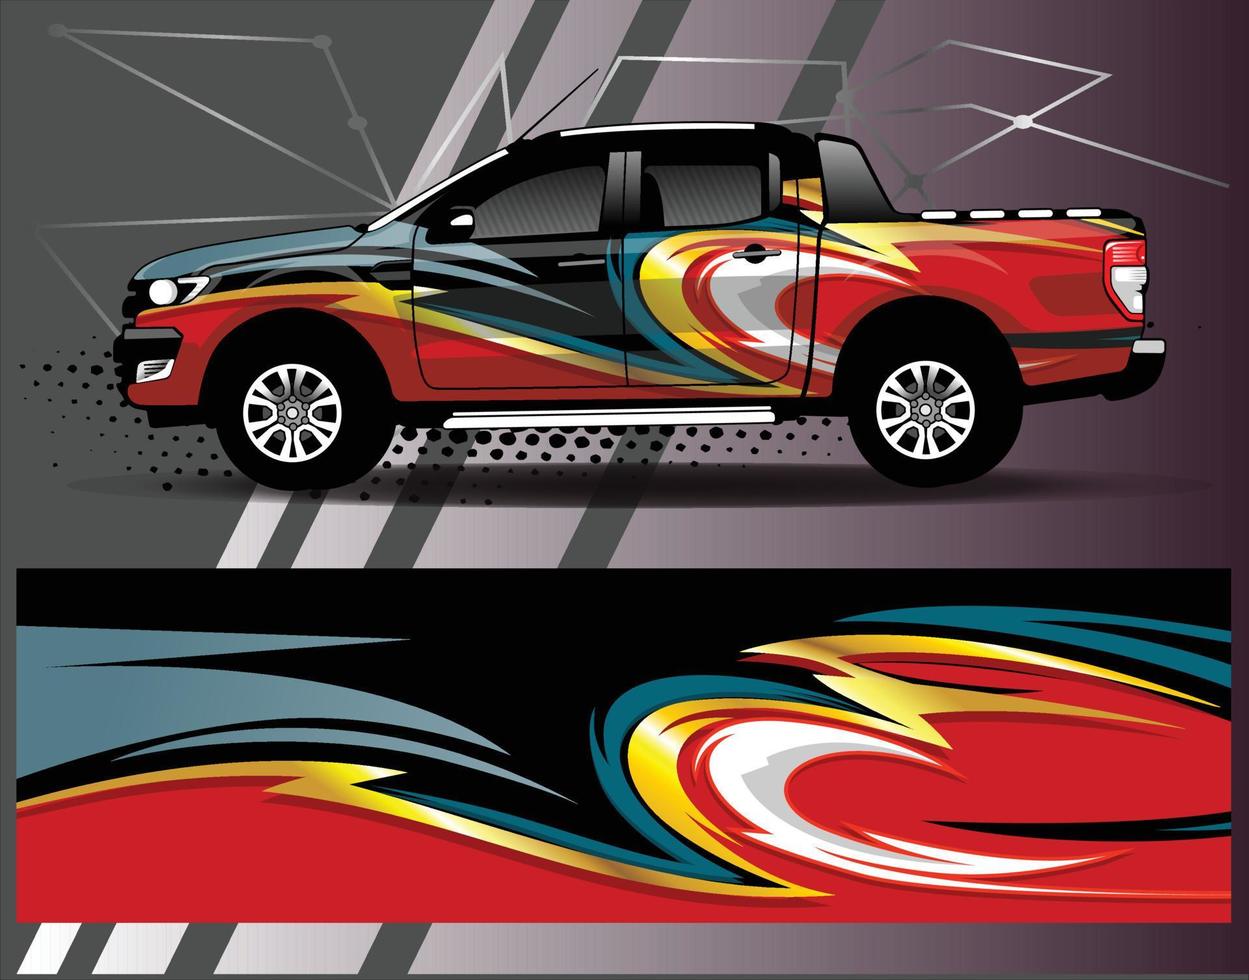 Car wrap design vector  truck and cargo van decal. Graphic abstract stripe racing background designs for vehicle  rally  race  adventure and car racing livery